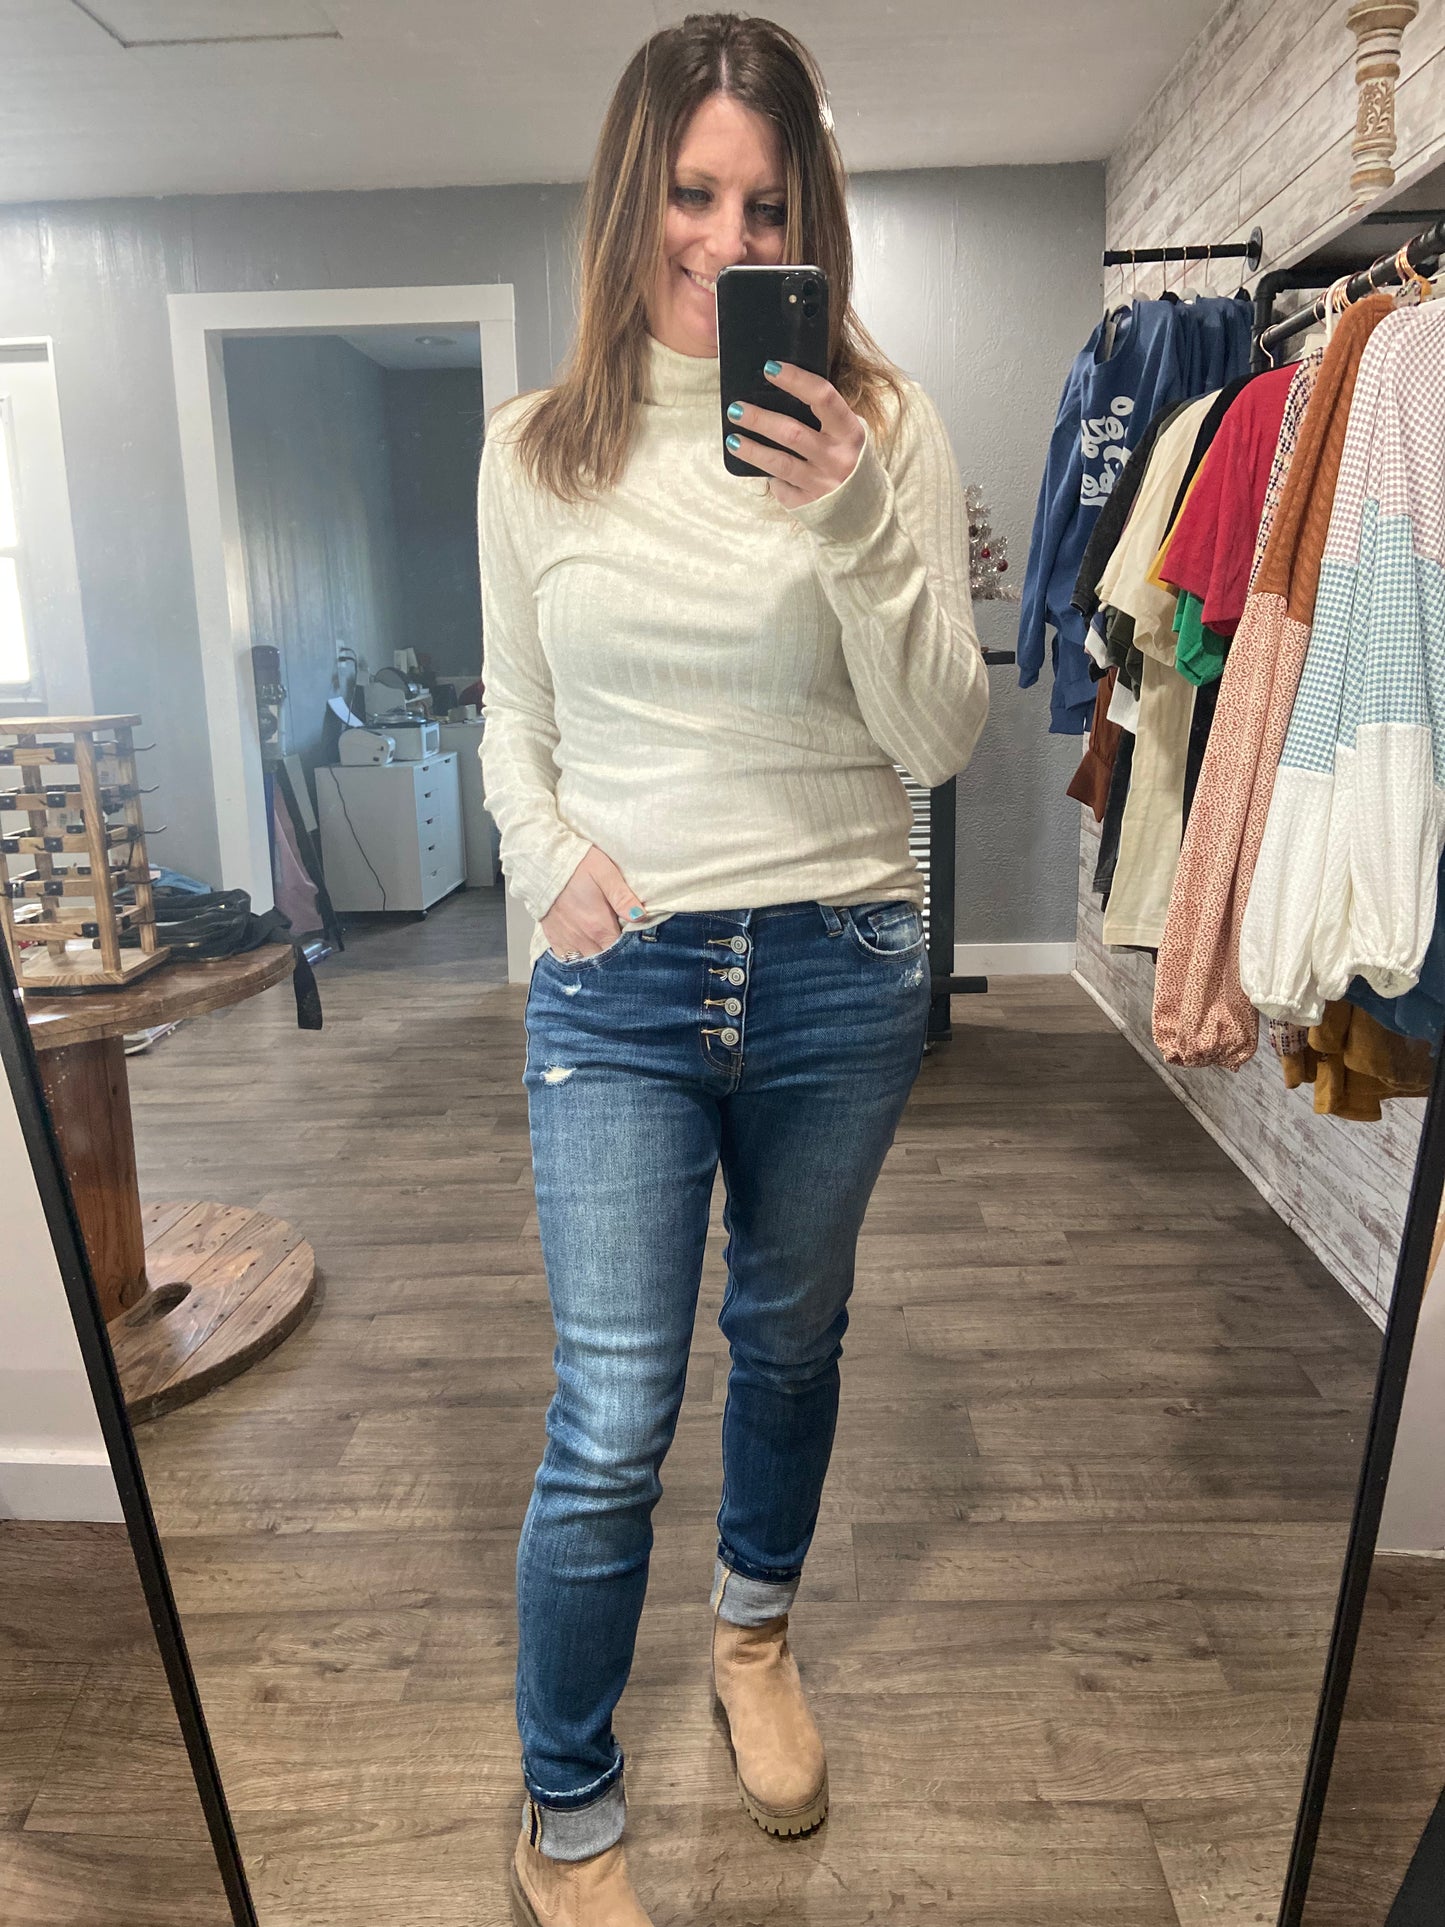 Subtle and Sweet Ribbed Turtle Neck Top - Sand Beige